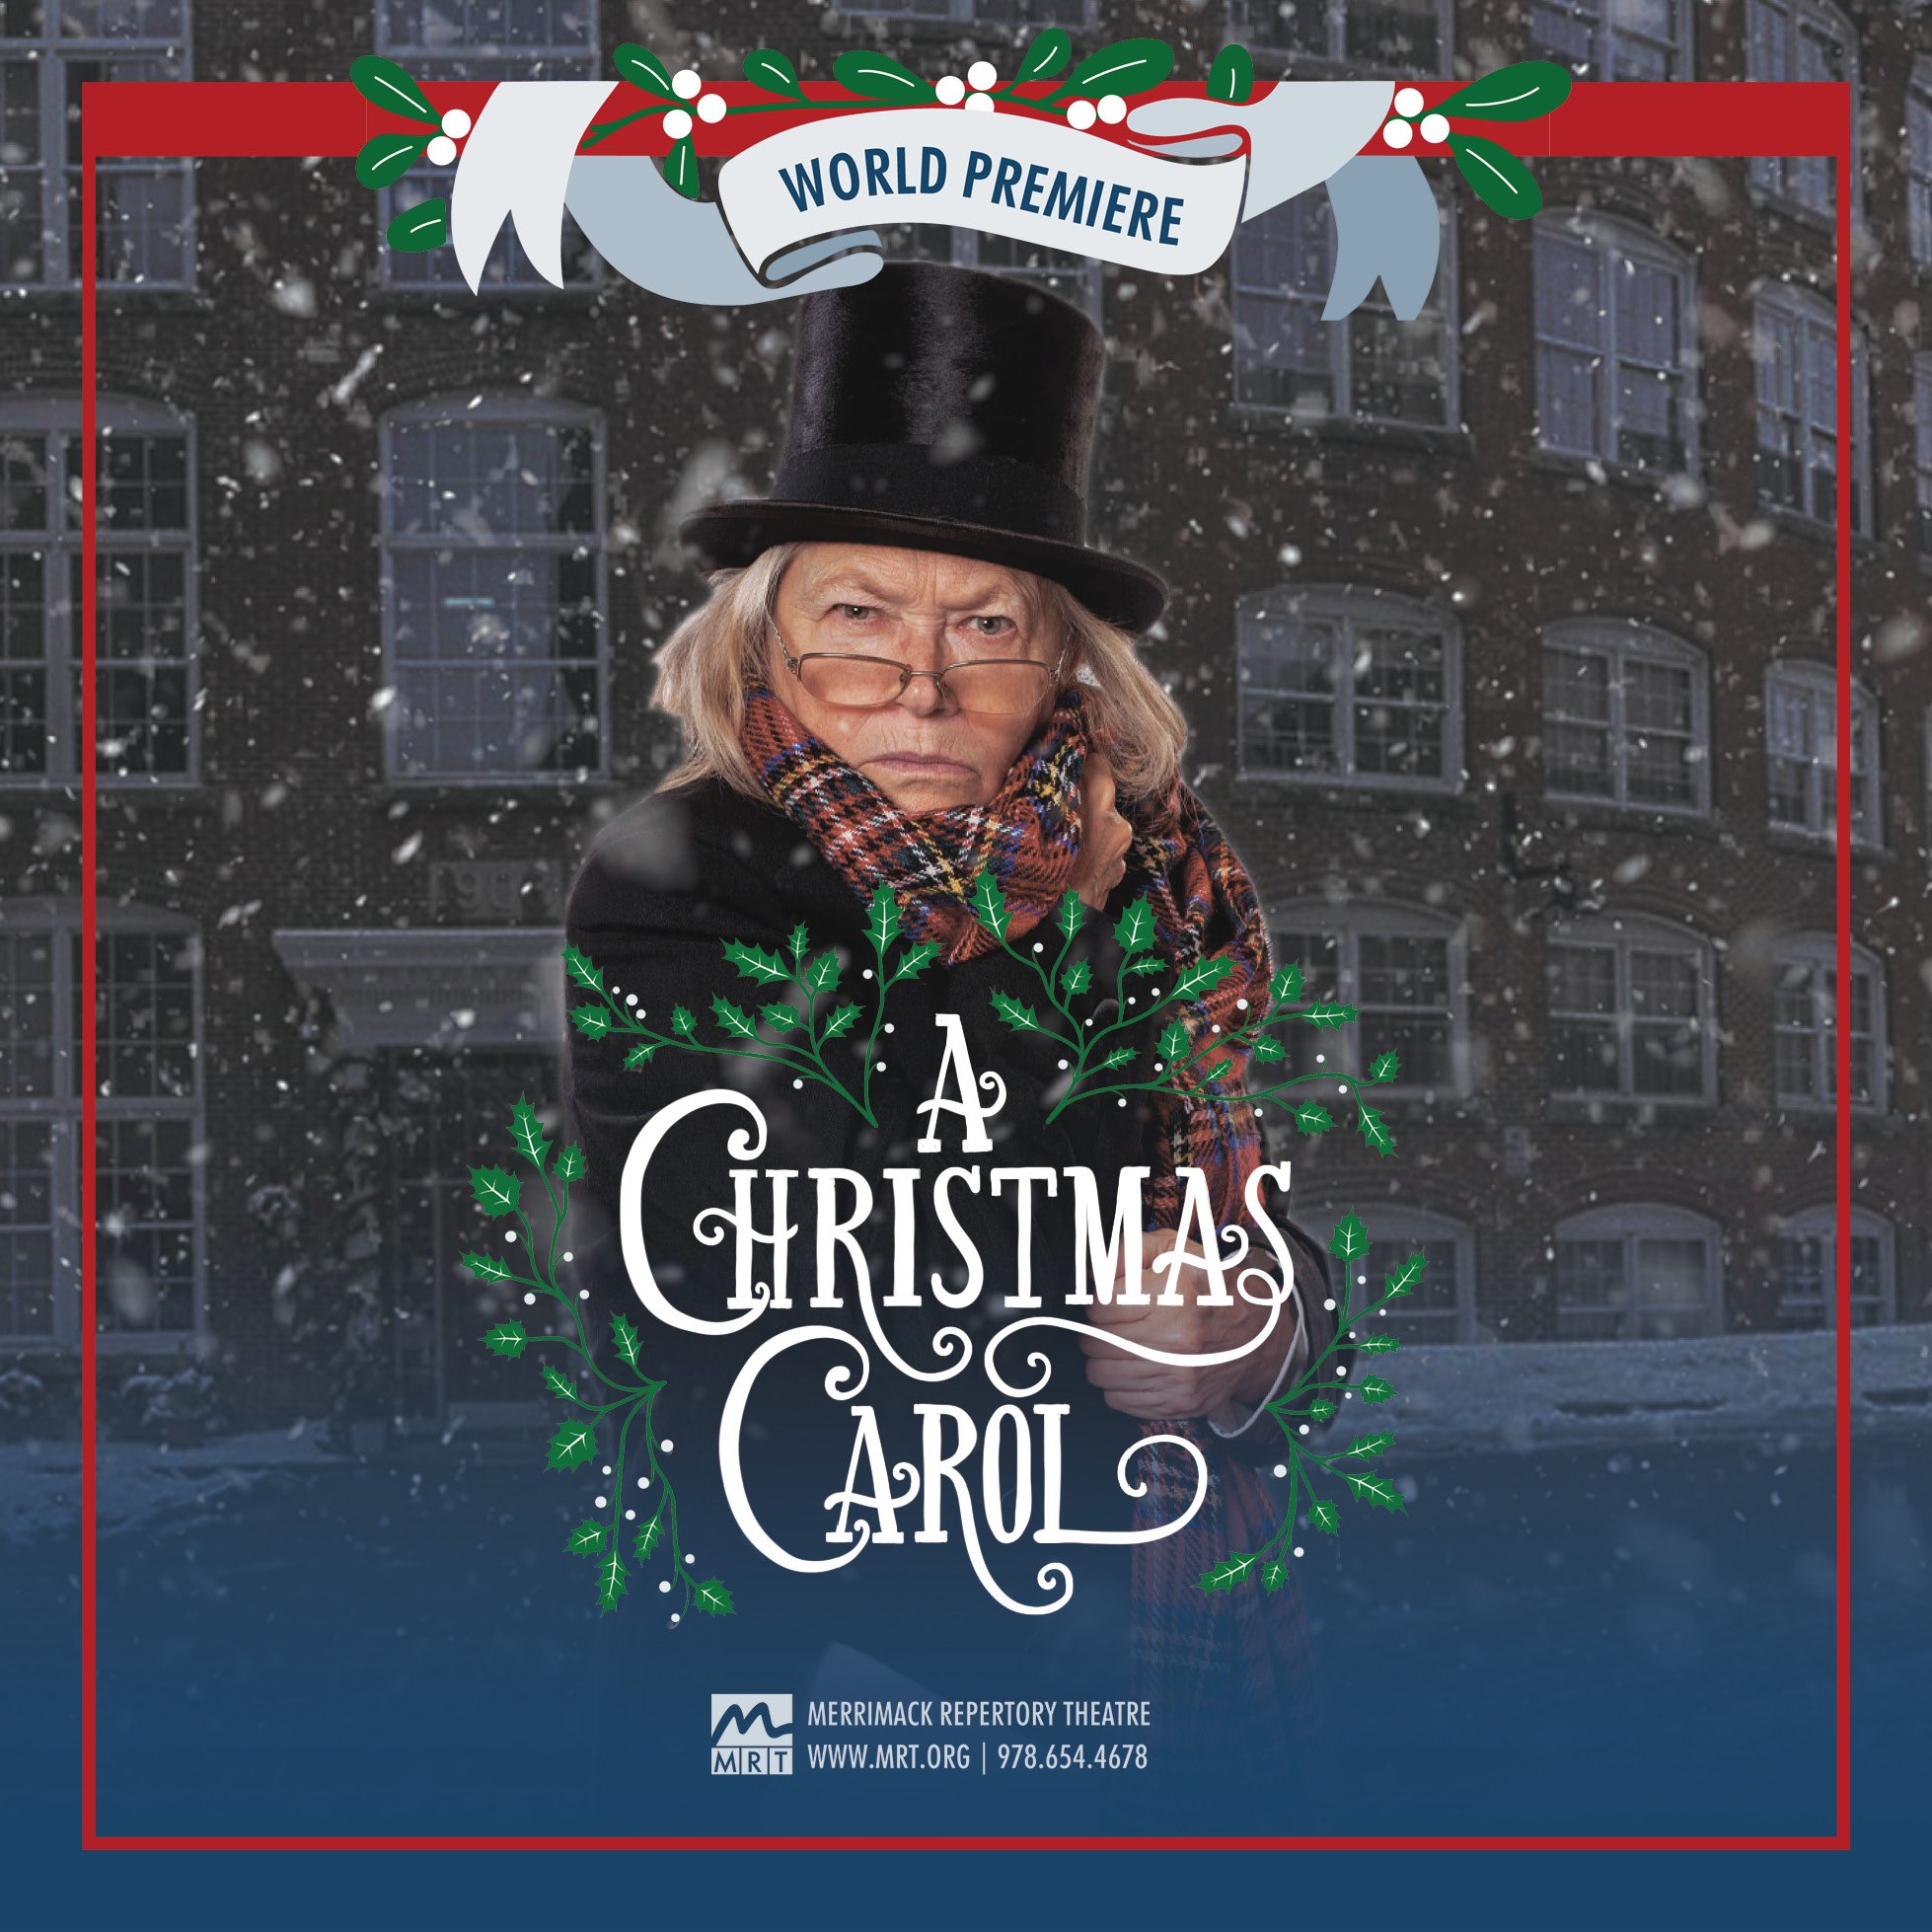 "A Christmas Carol" Adapted and Directed by Courtney Sale - Merrimack Repertory Theatre (Lowell, MA.)